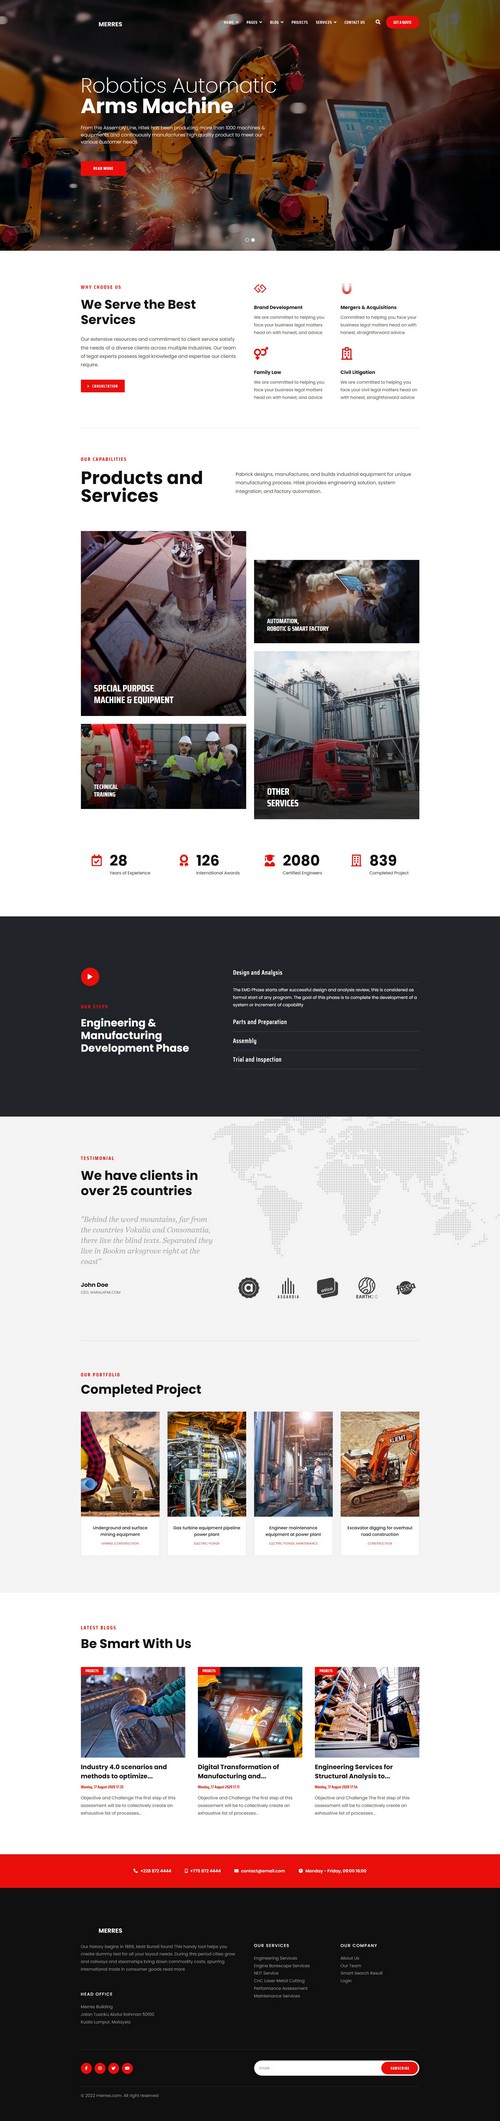 Merres - Industrial and Manufacturing Joomla 4 Template